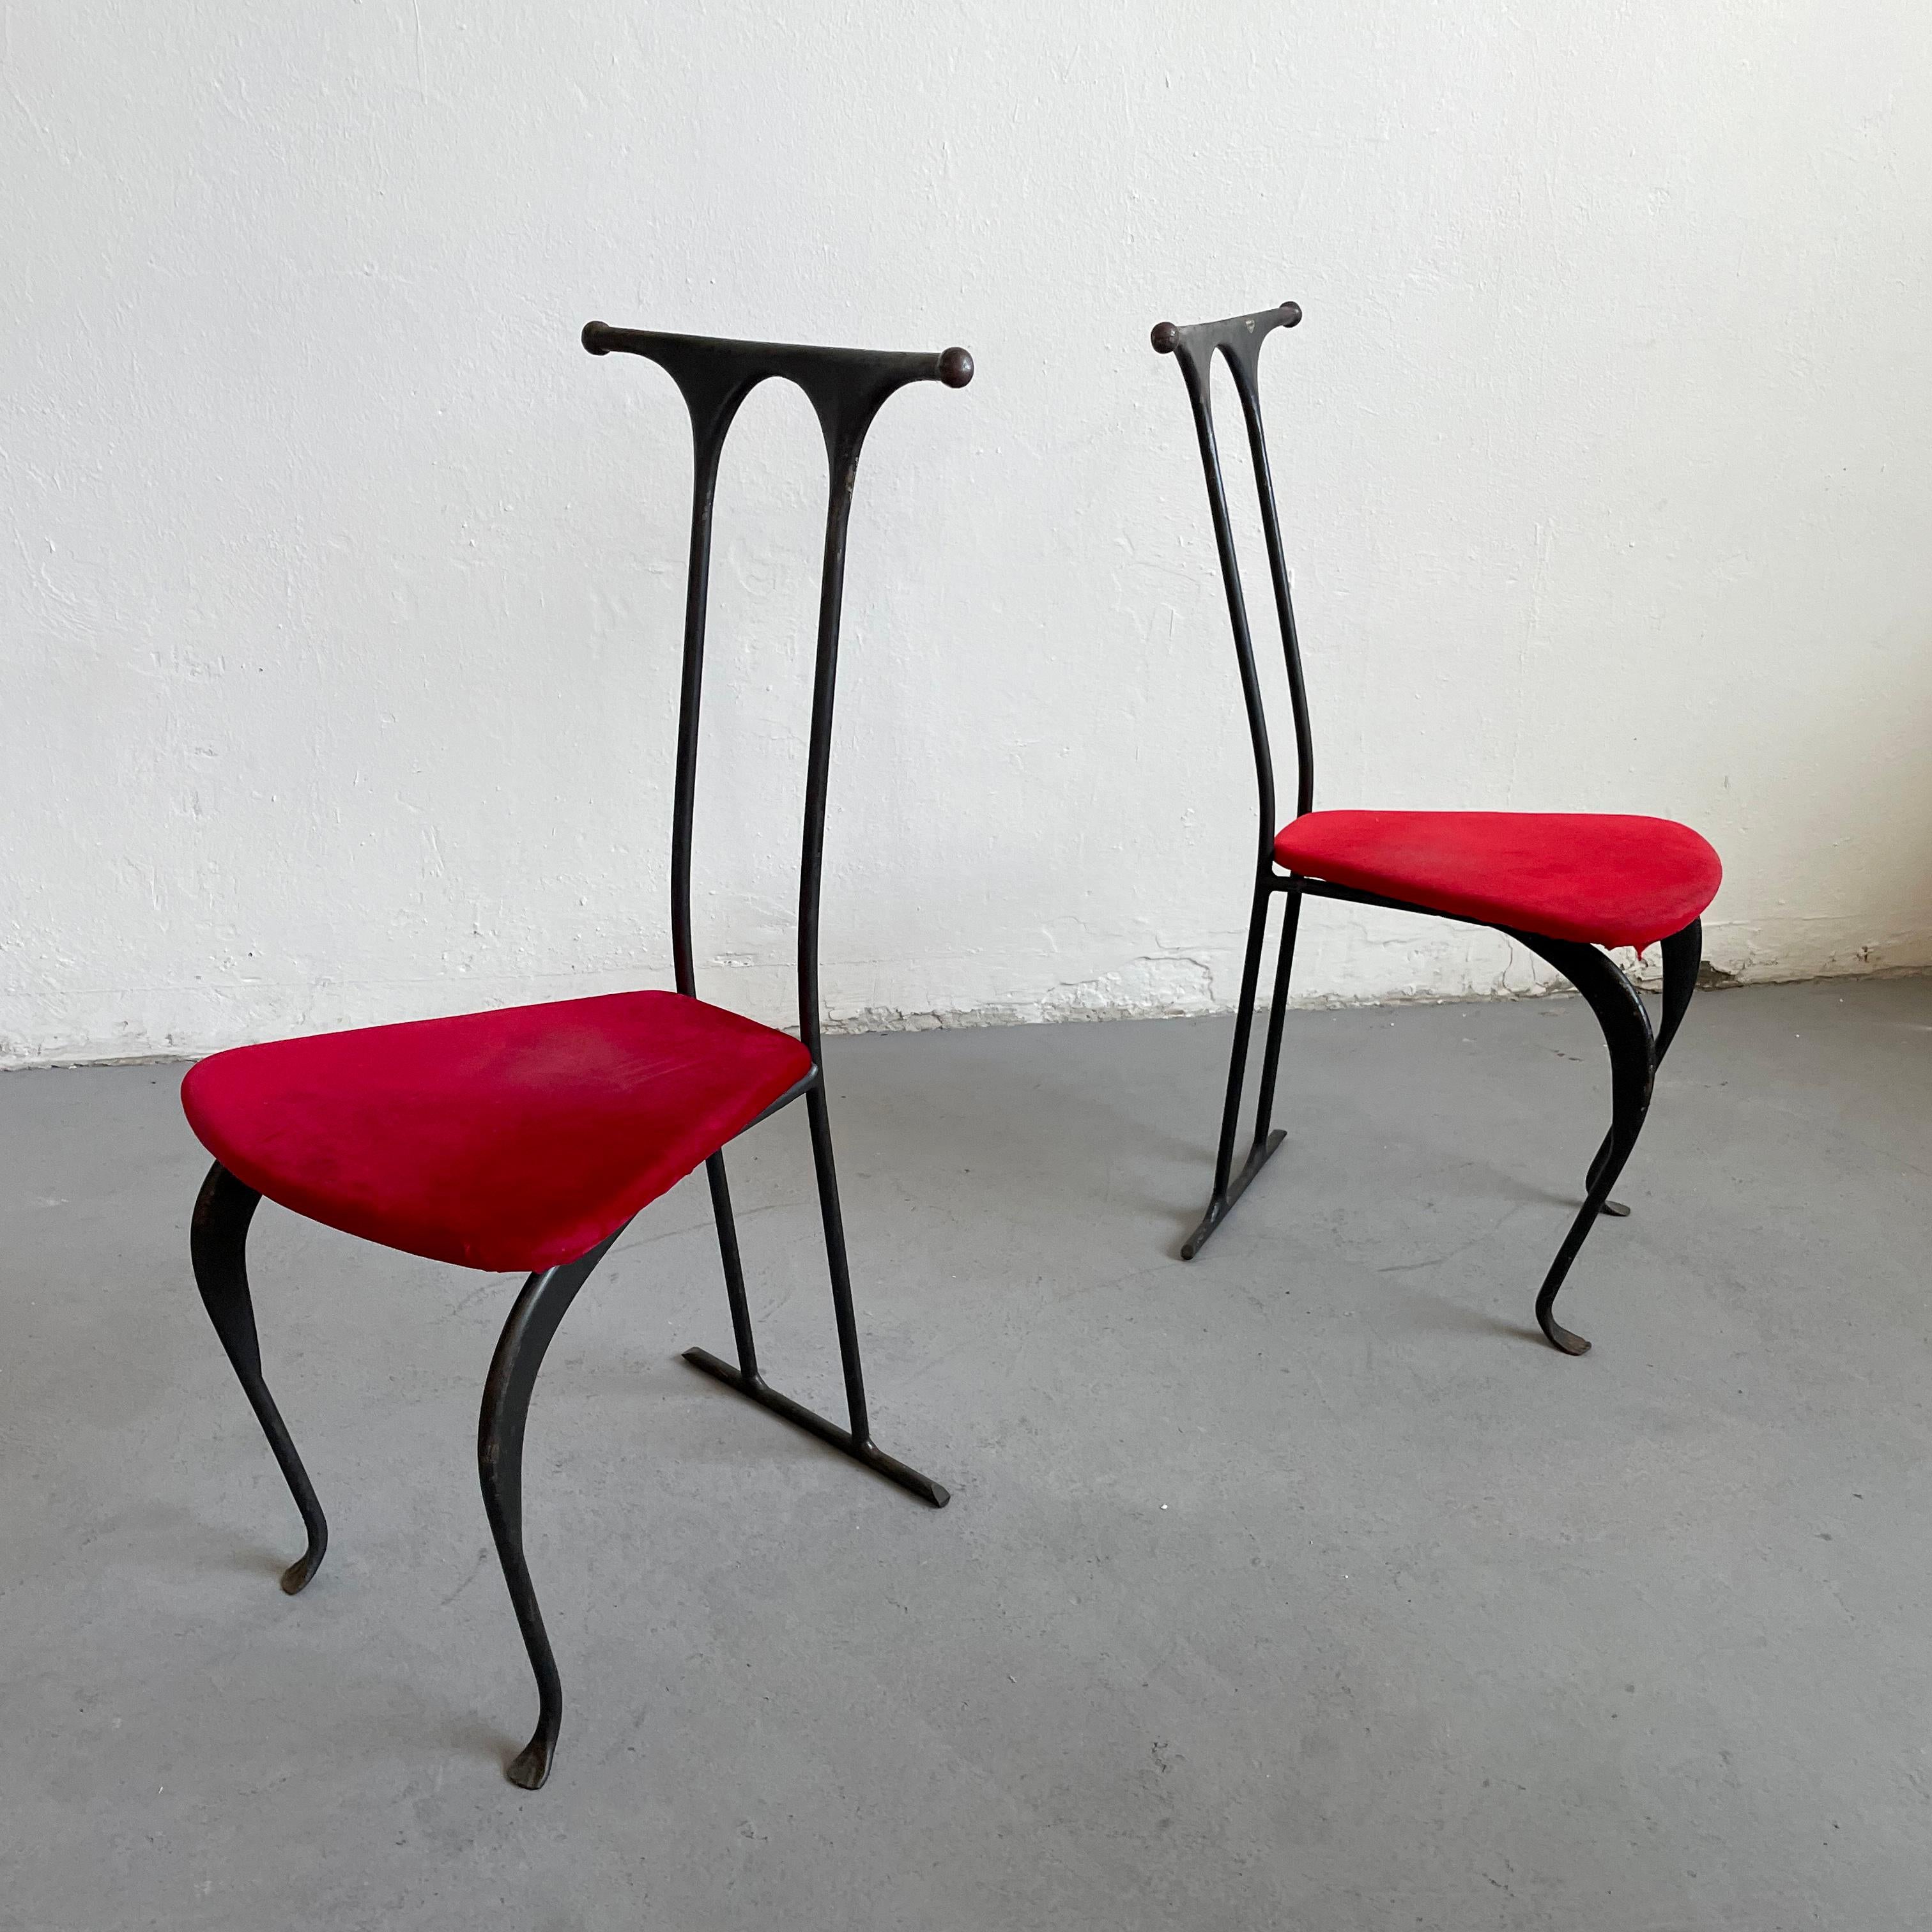 Pair of Postmodern Brutalist Artisanal Wrought Iron Chairs, Poland, 1980s 2